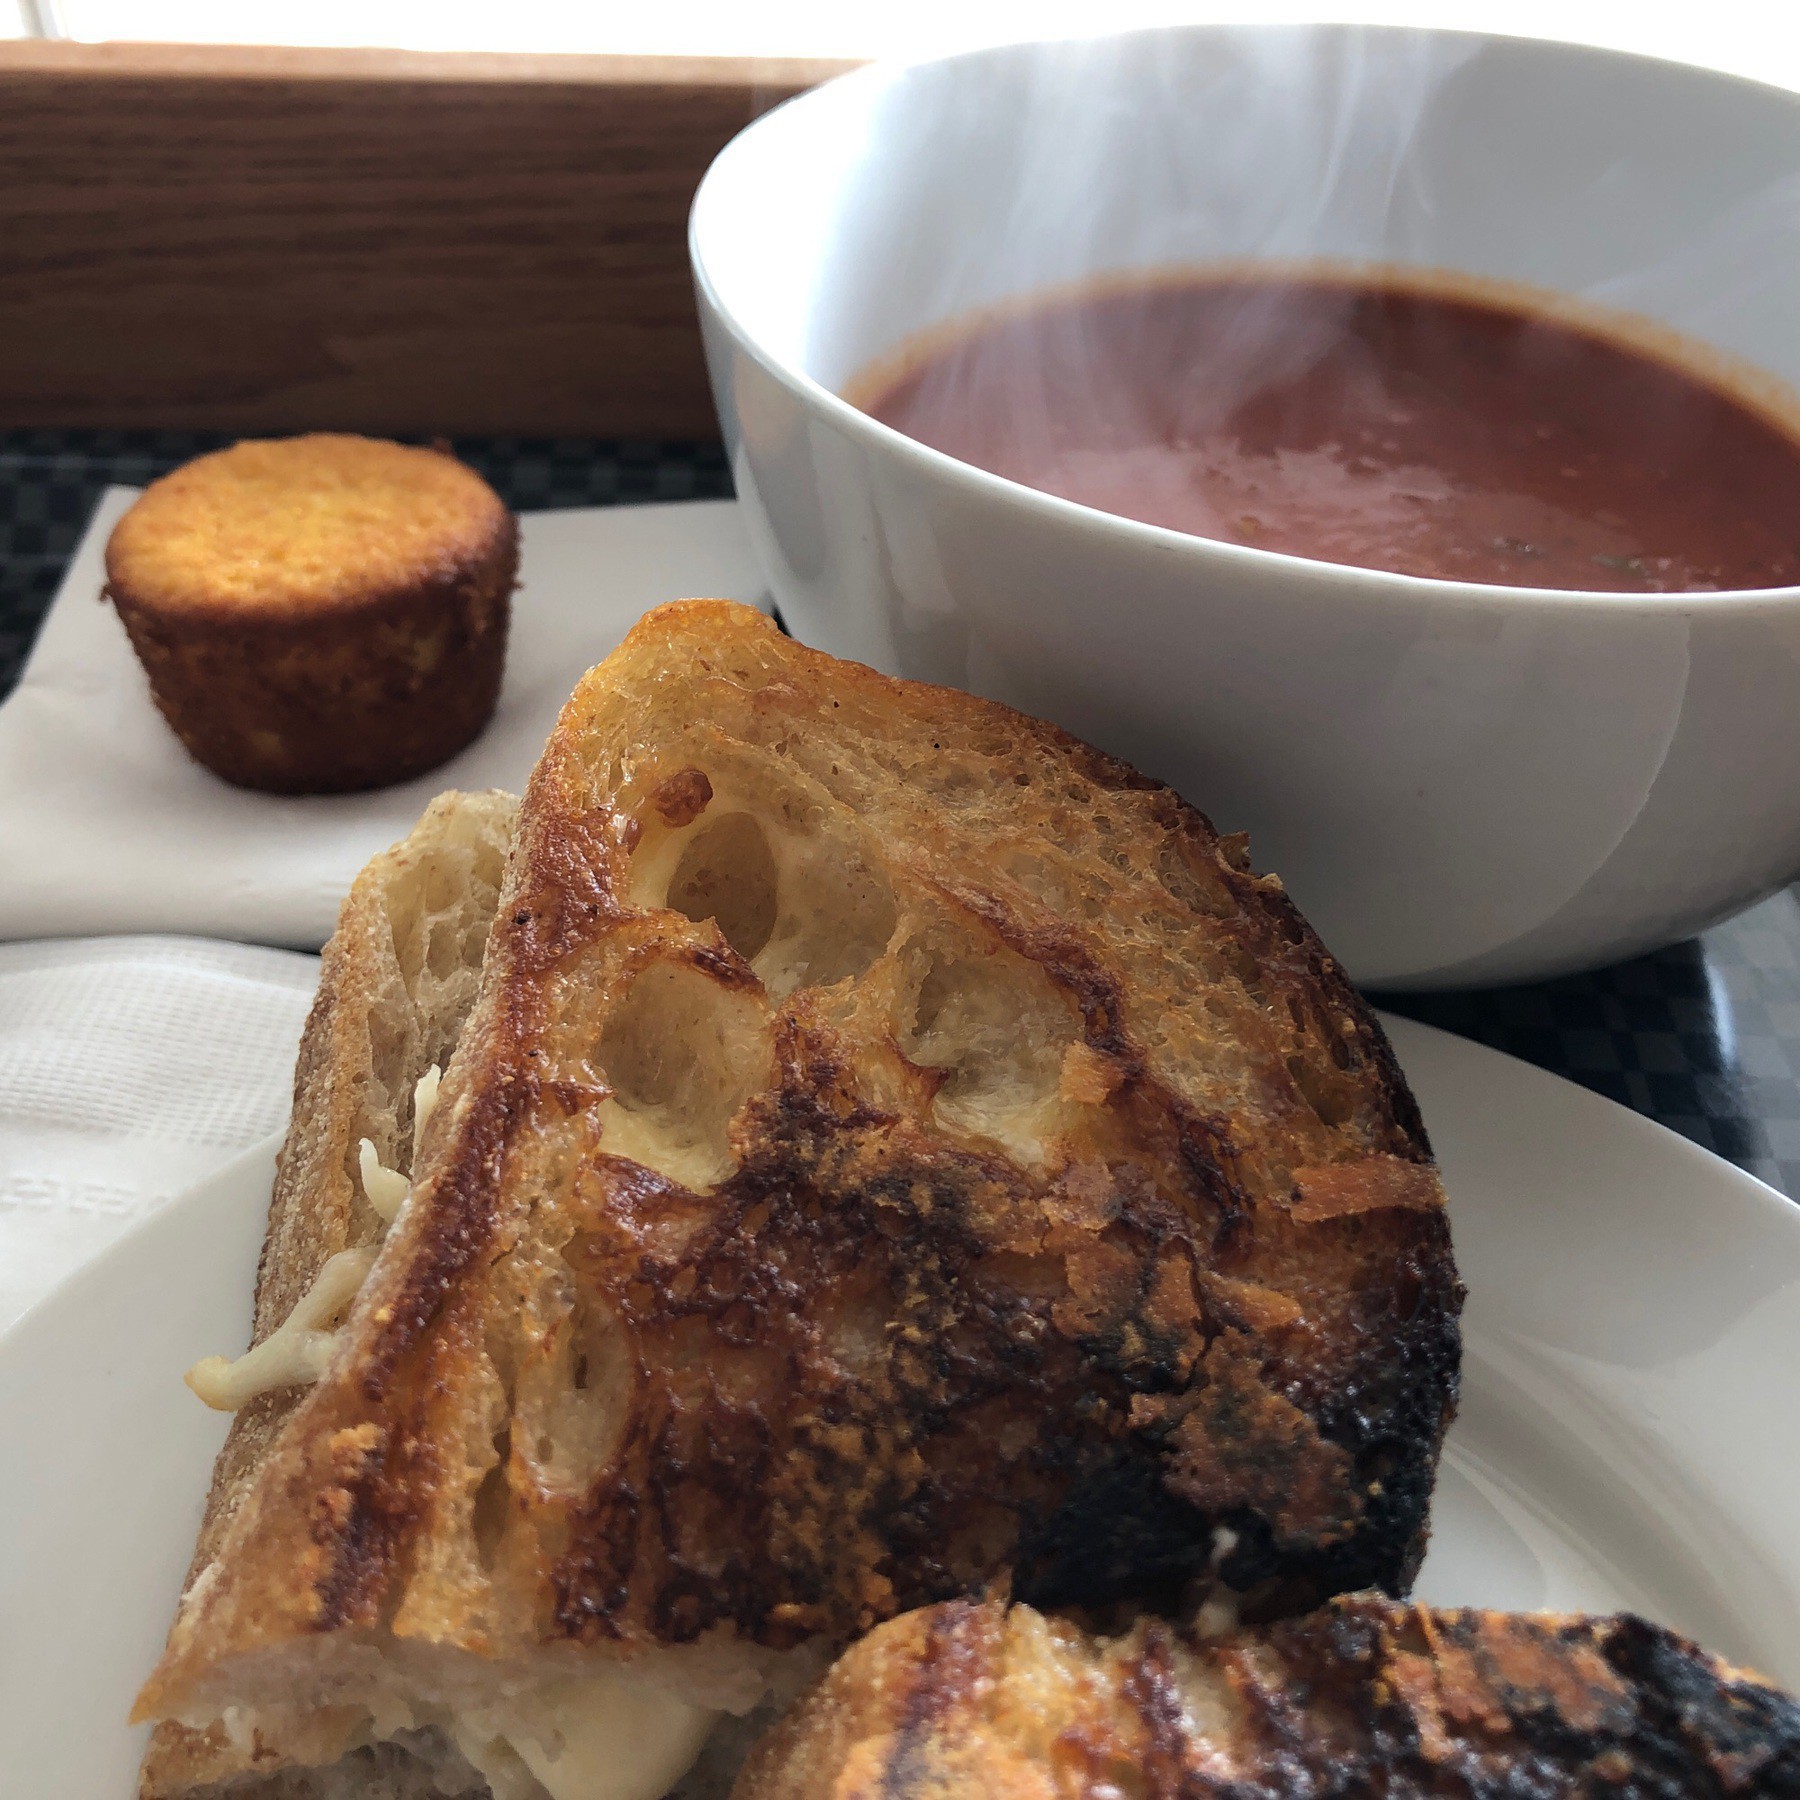 Grilled cheese and tomato soup in bowl with small muffin.